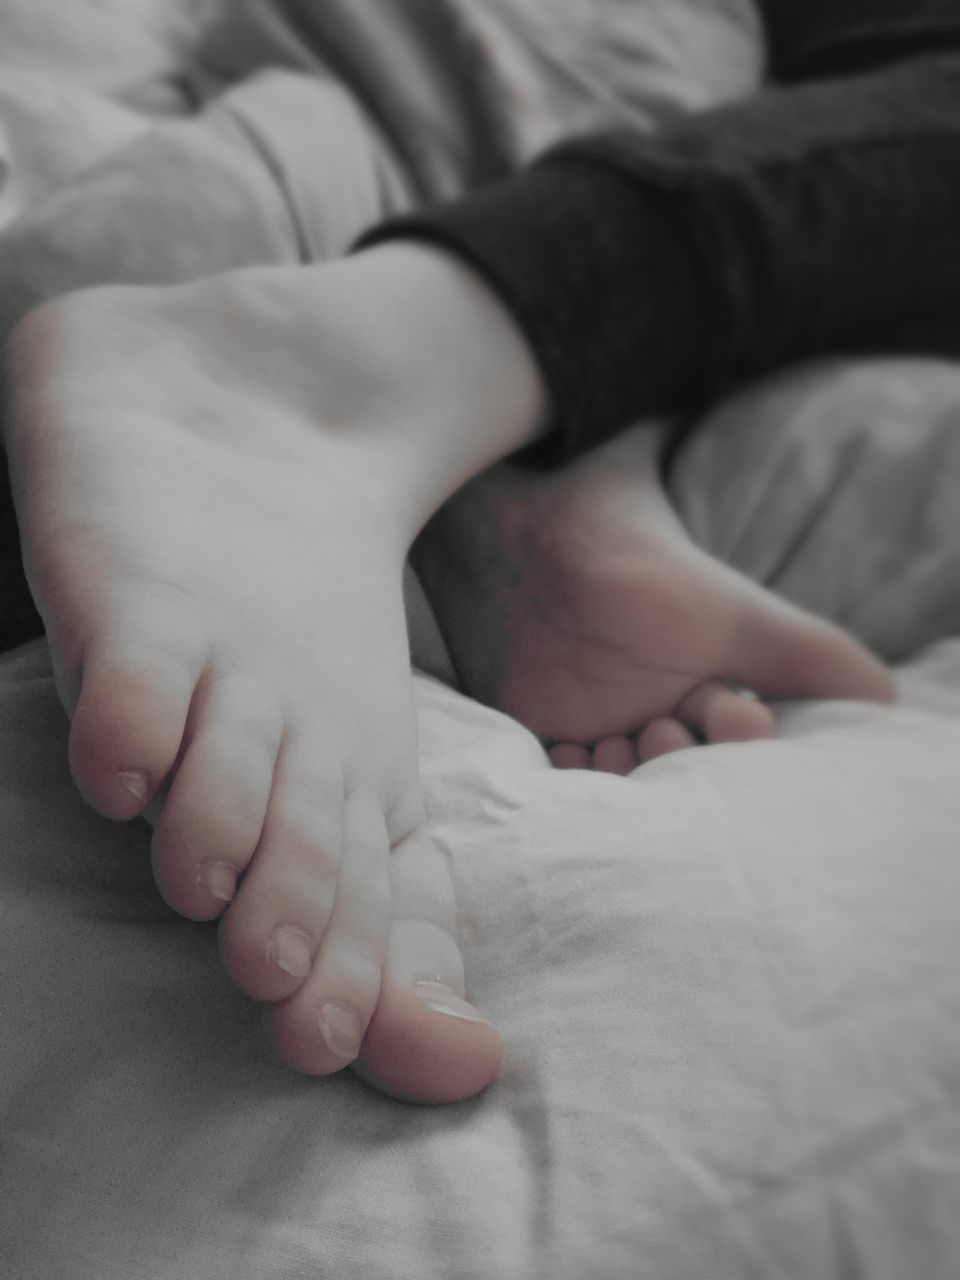 LOW SECTION OF BABY FEET